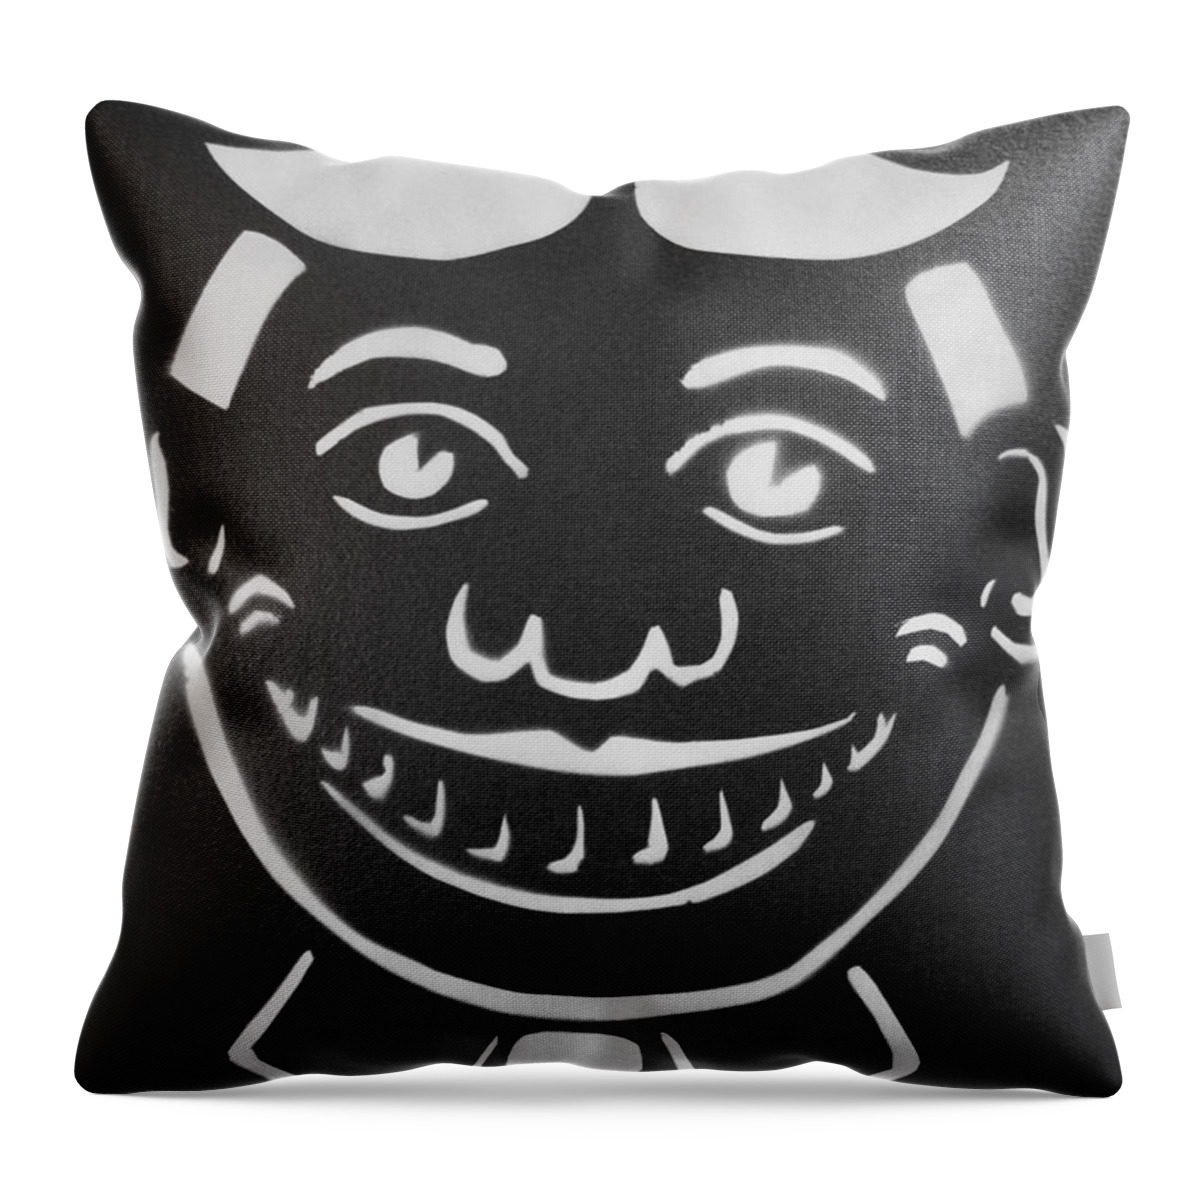 Tillie Of Asbury Park Throw Pillow featuring the painting Black and White Tillie by Patricia Arroyo